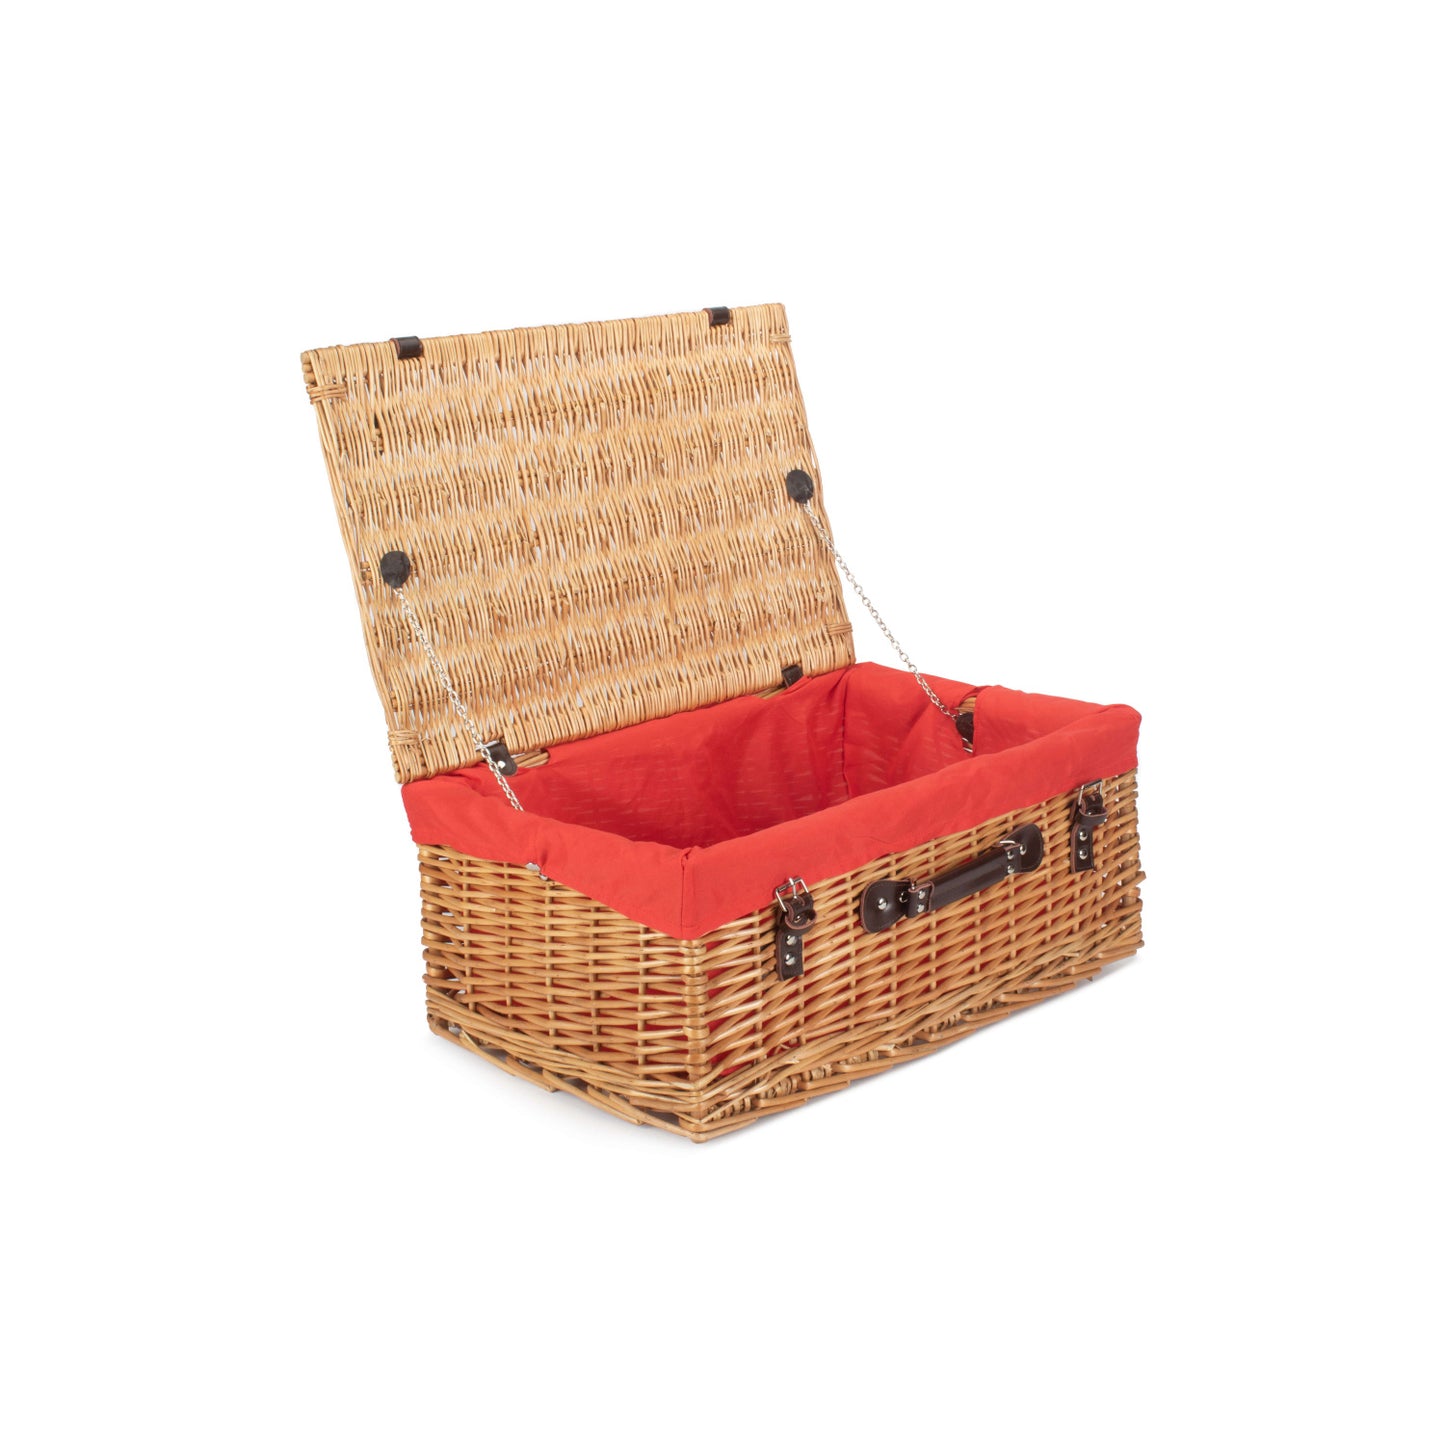 22 Inch Buff Hamper With Red Lining